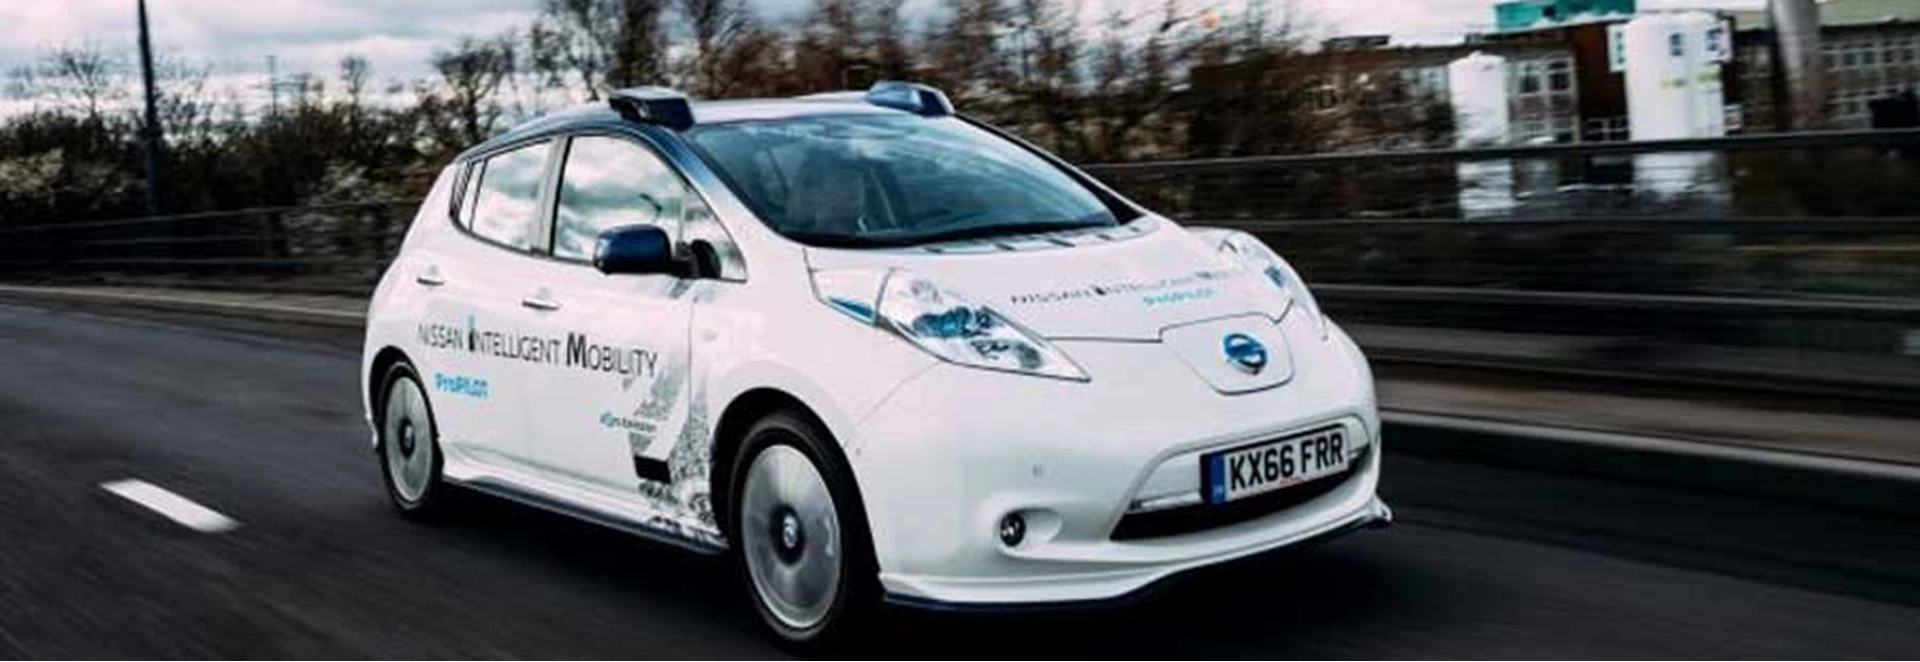 Nissan has trialled a driverless car in London